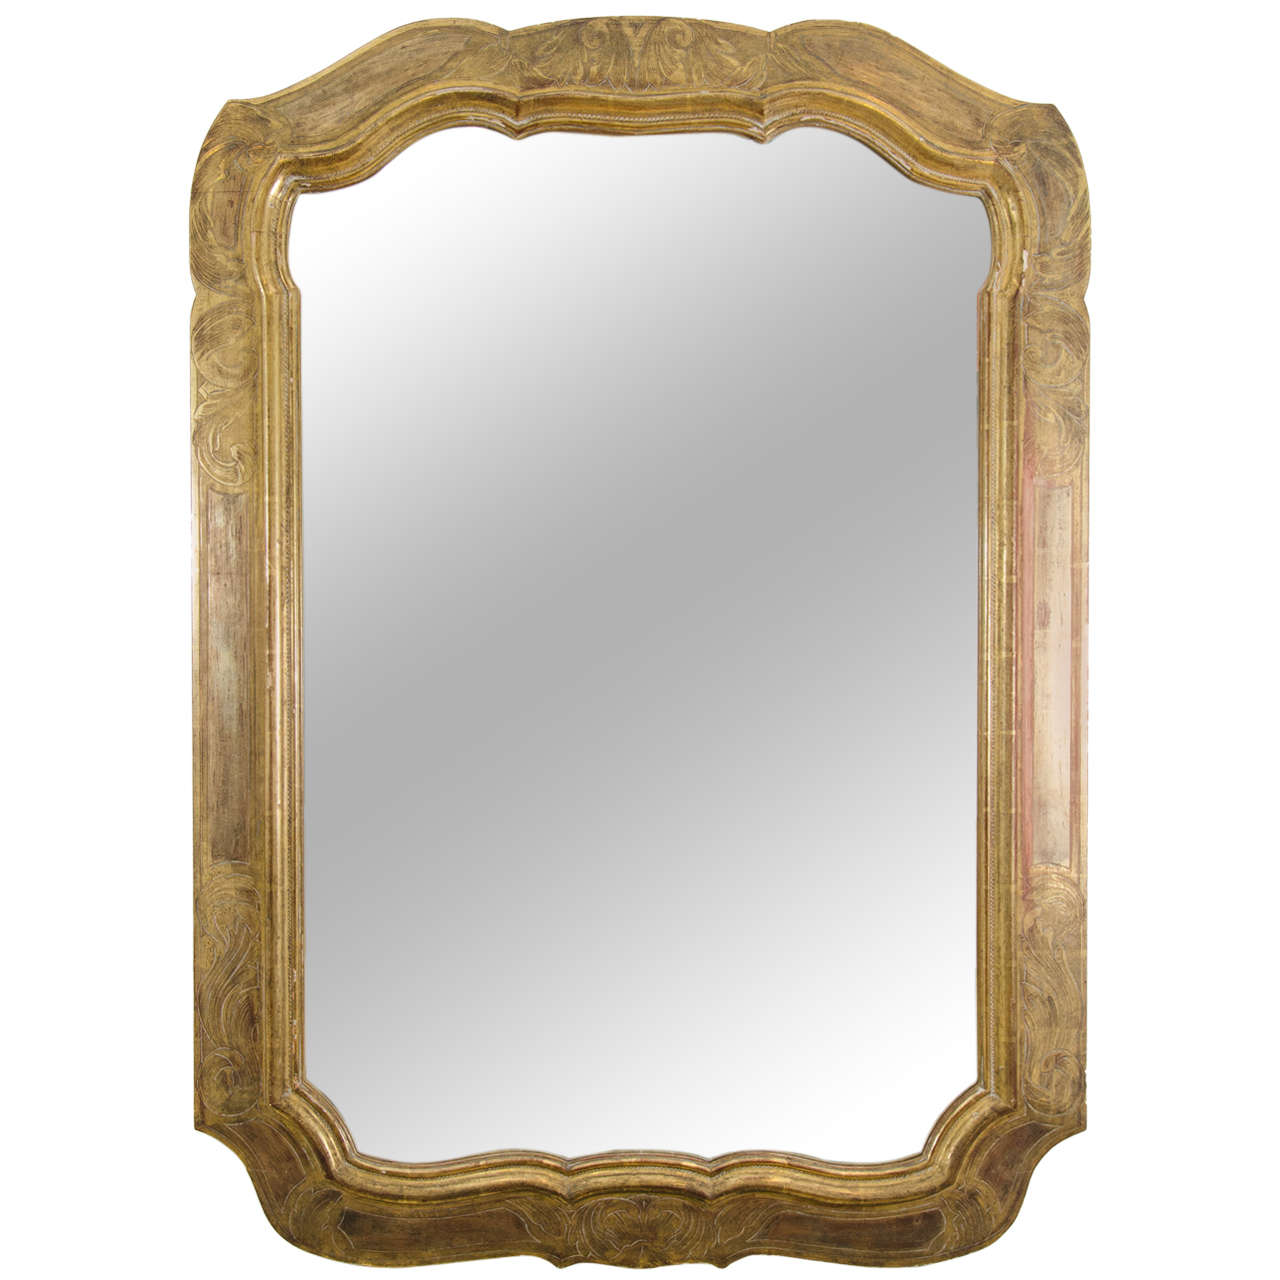 An Antique Mirror with Hand Carved Gilt Wood Frame by Max Kuehne at 1stdibs